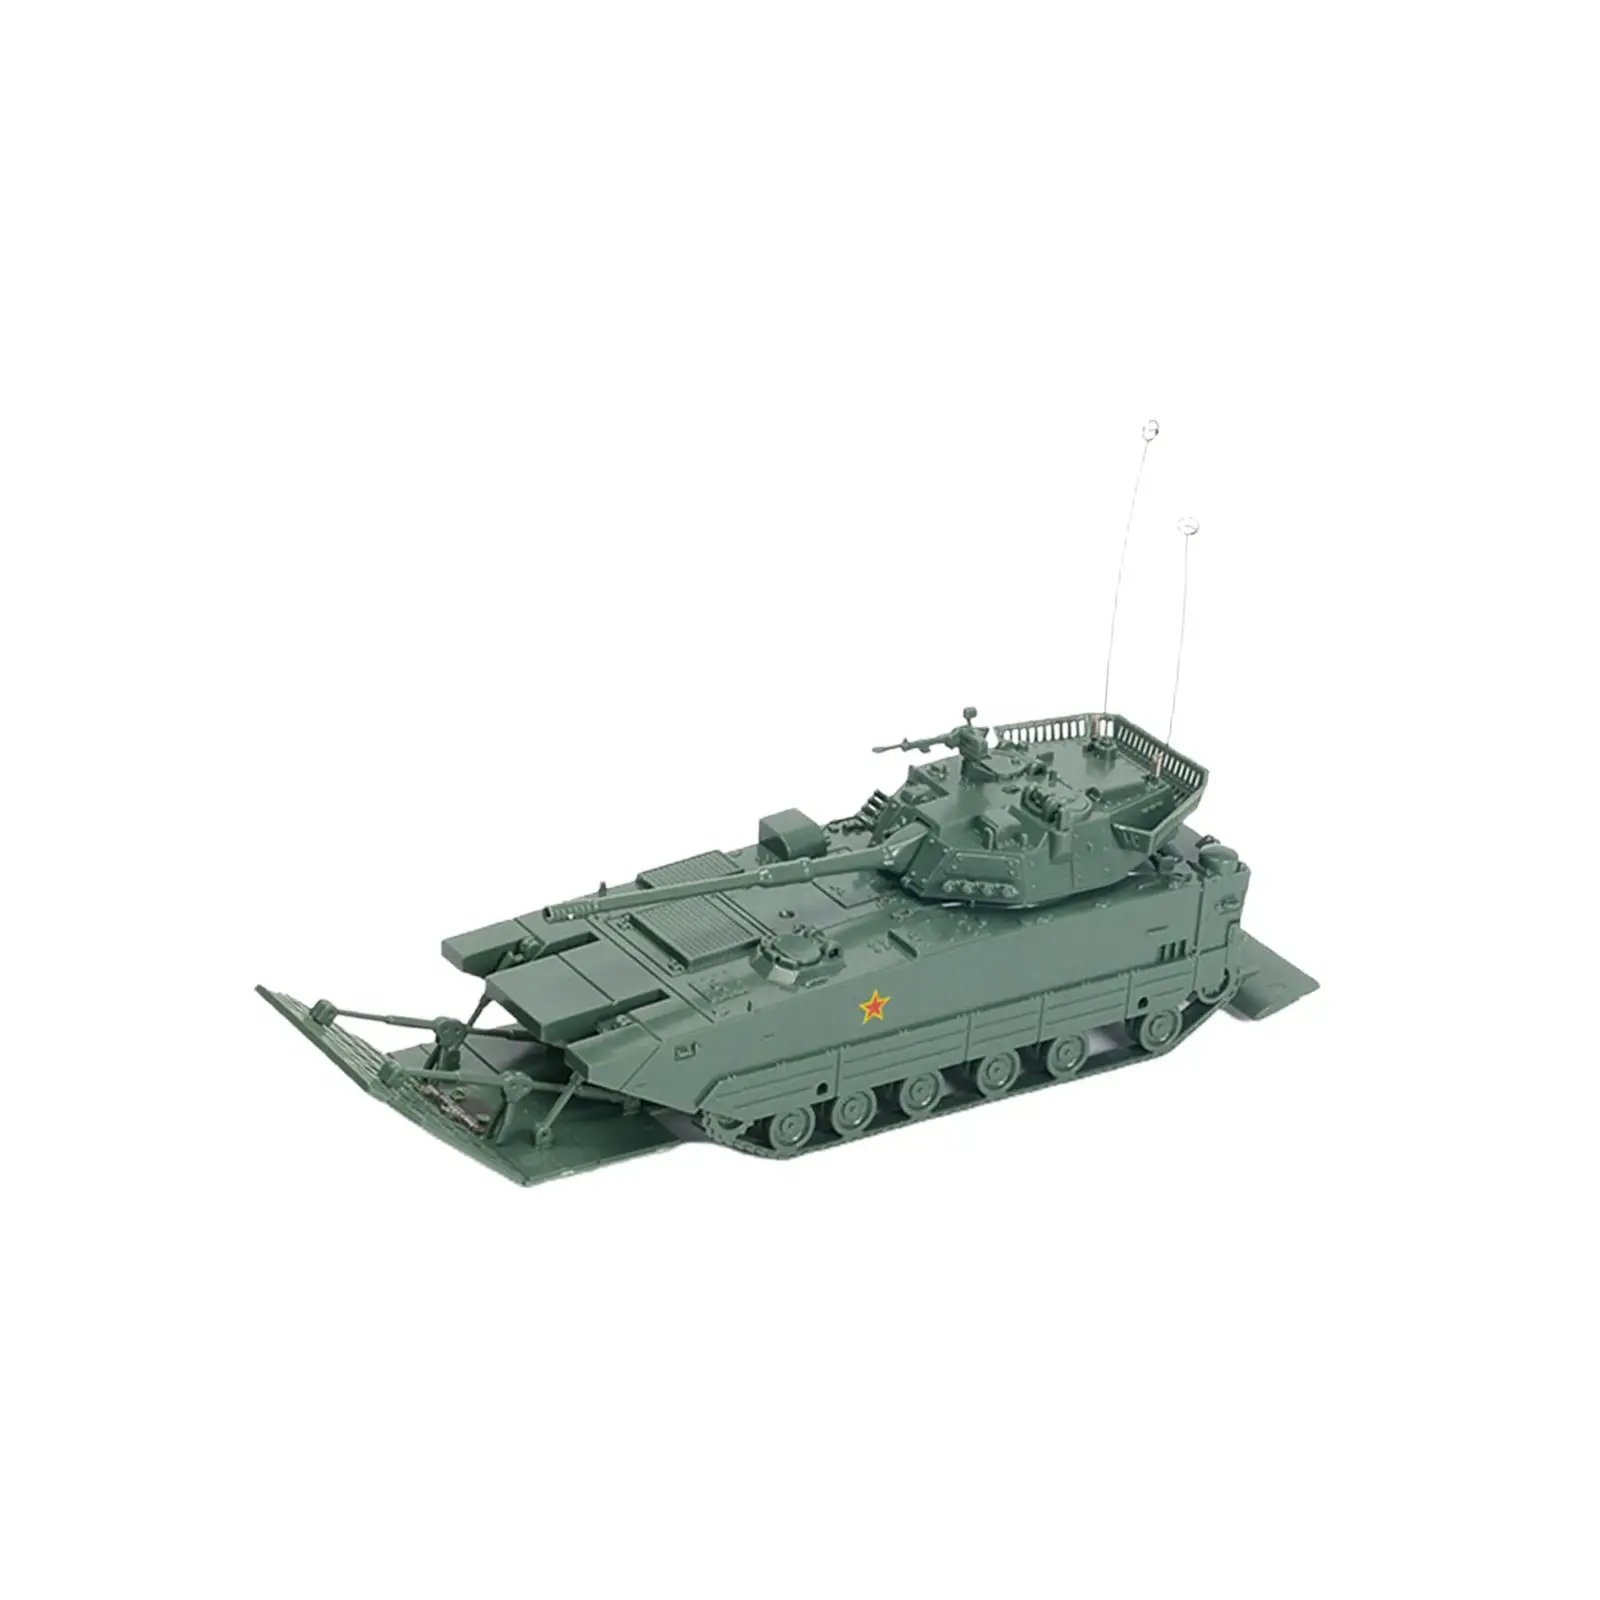 1:72 Scale Education Toy Miniature Puzzles Assembled Tank Model 4D Tank Model for Display Collections Gift Kids Children